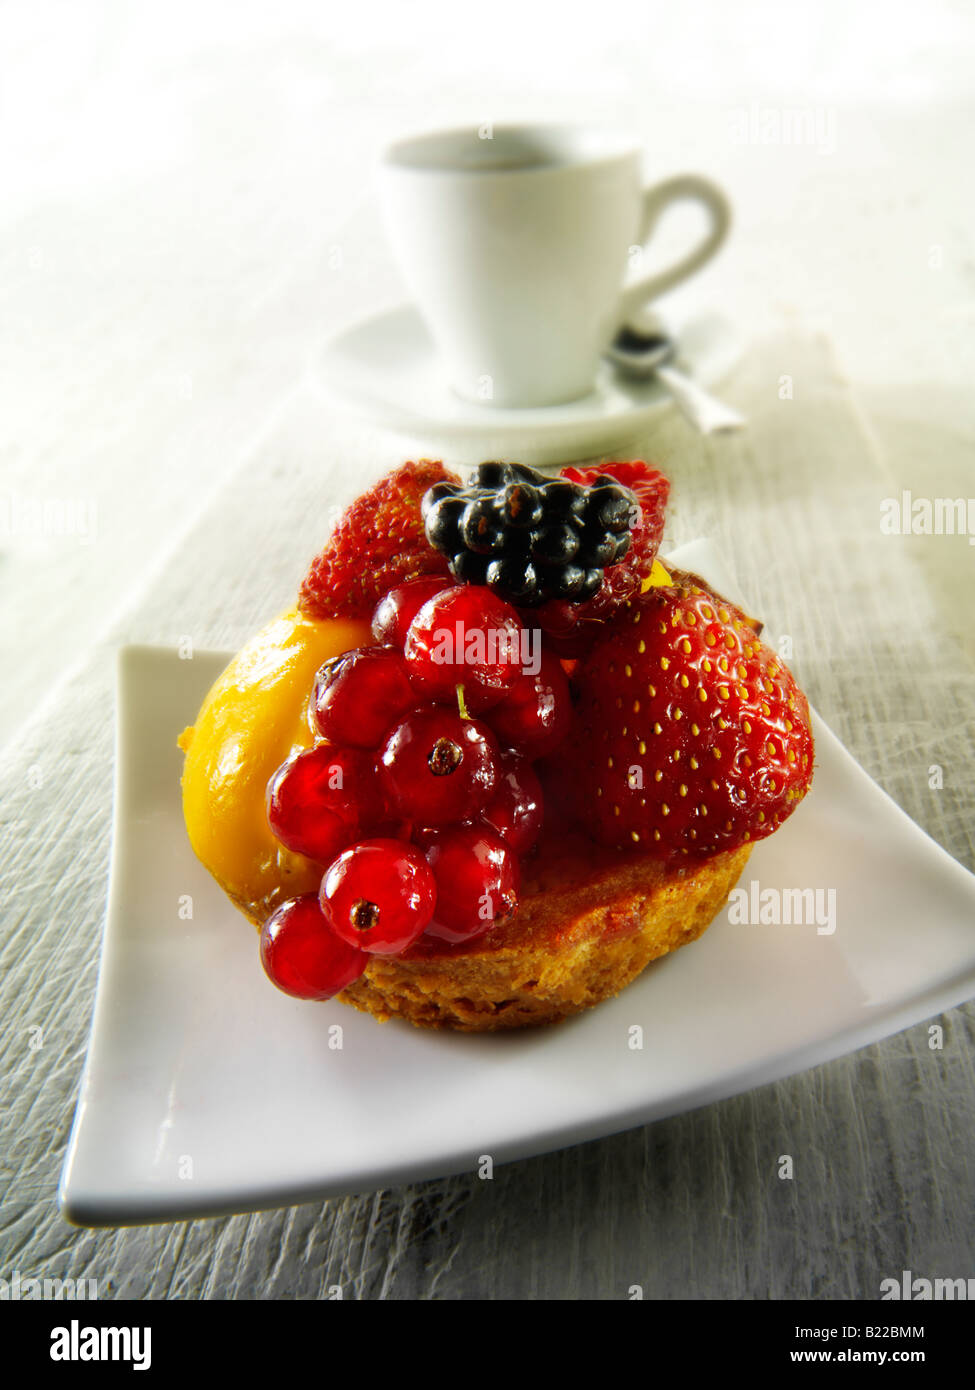 A fresh summer fruit individual sponge cake with raspberry mousse in a cafe setting with coffee Stock Photo